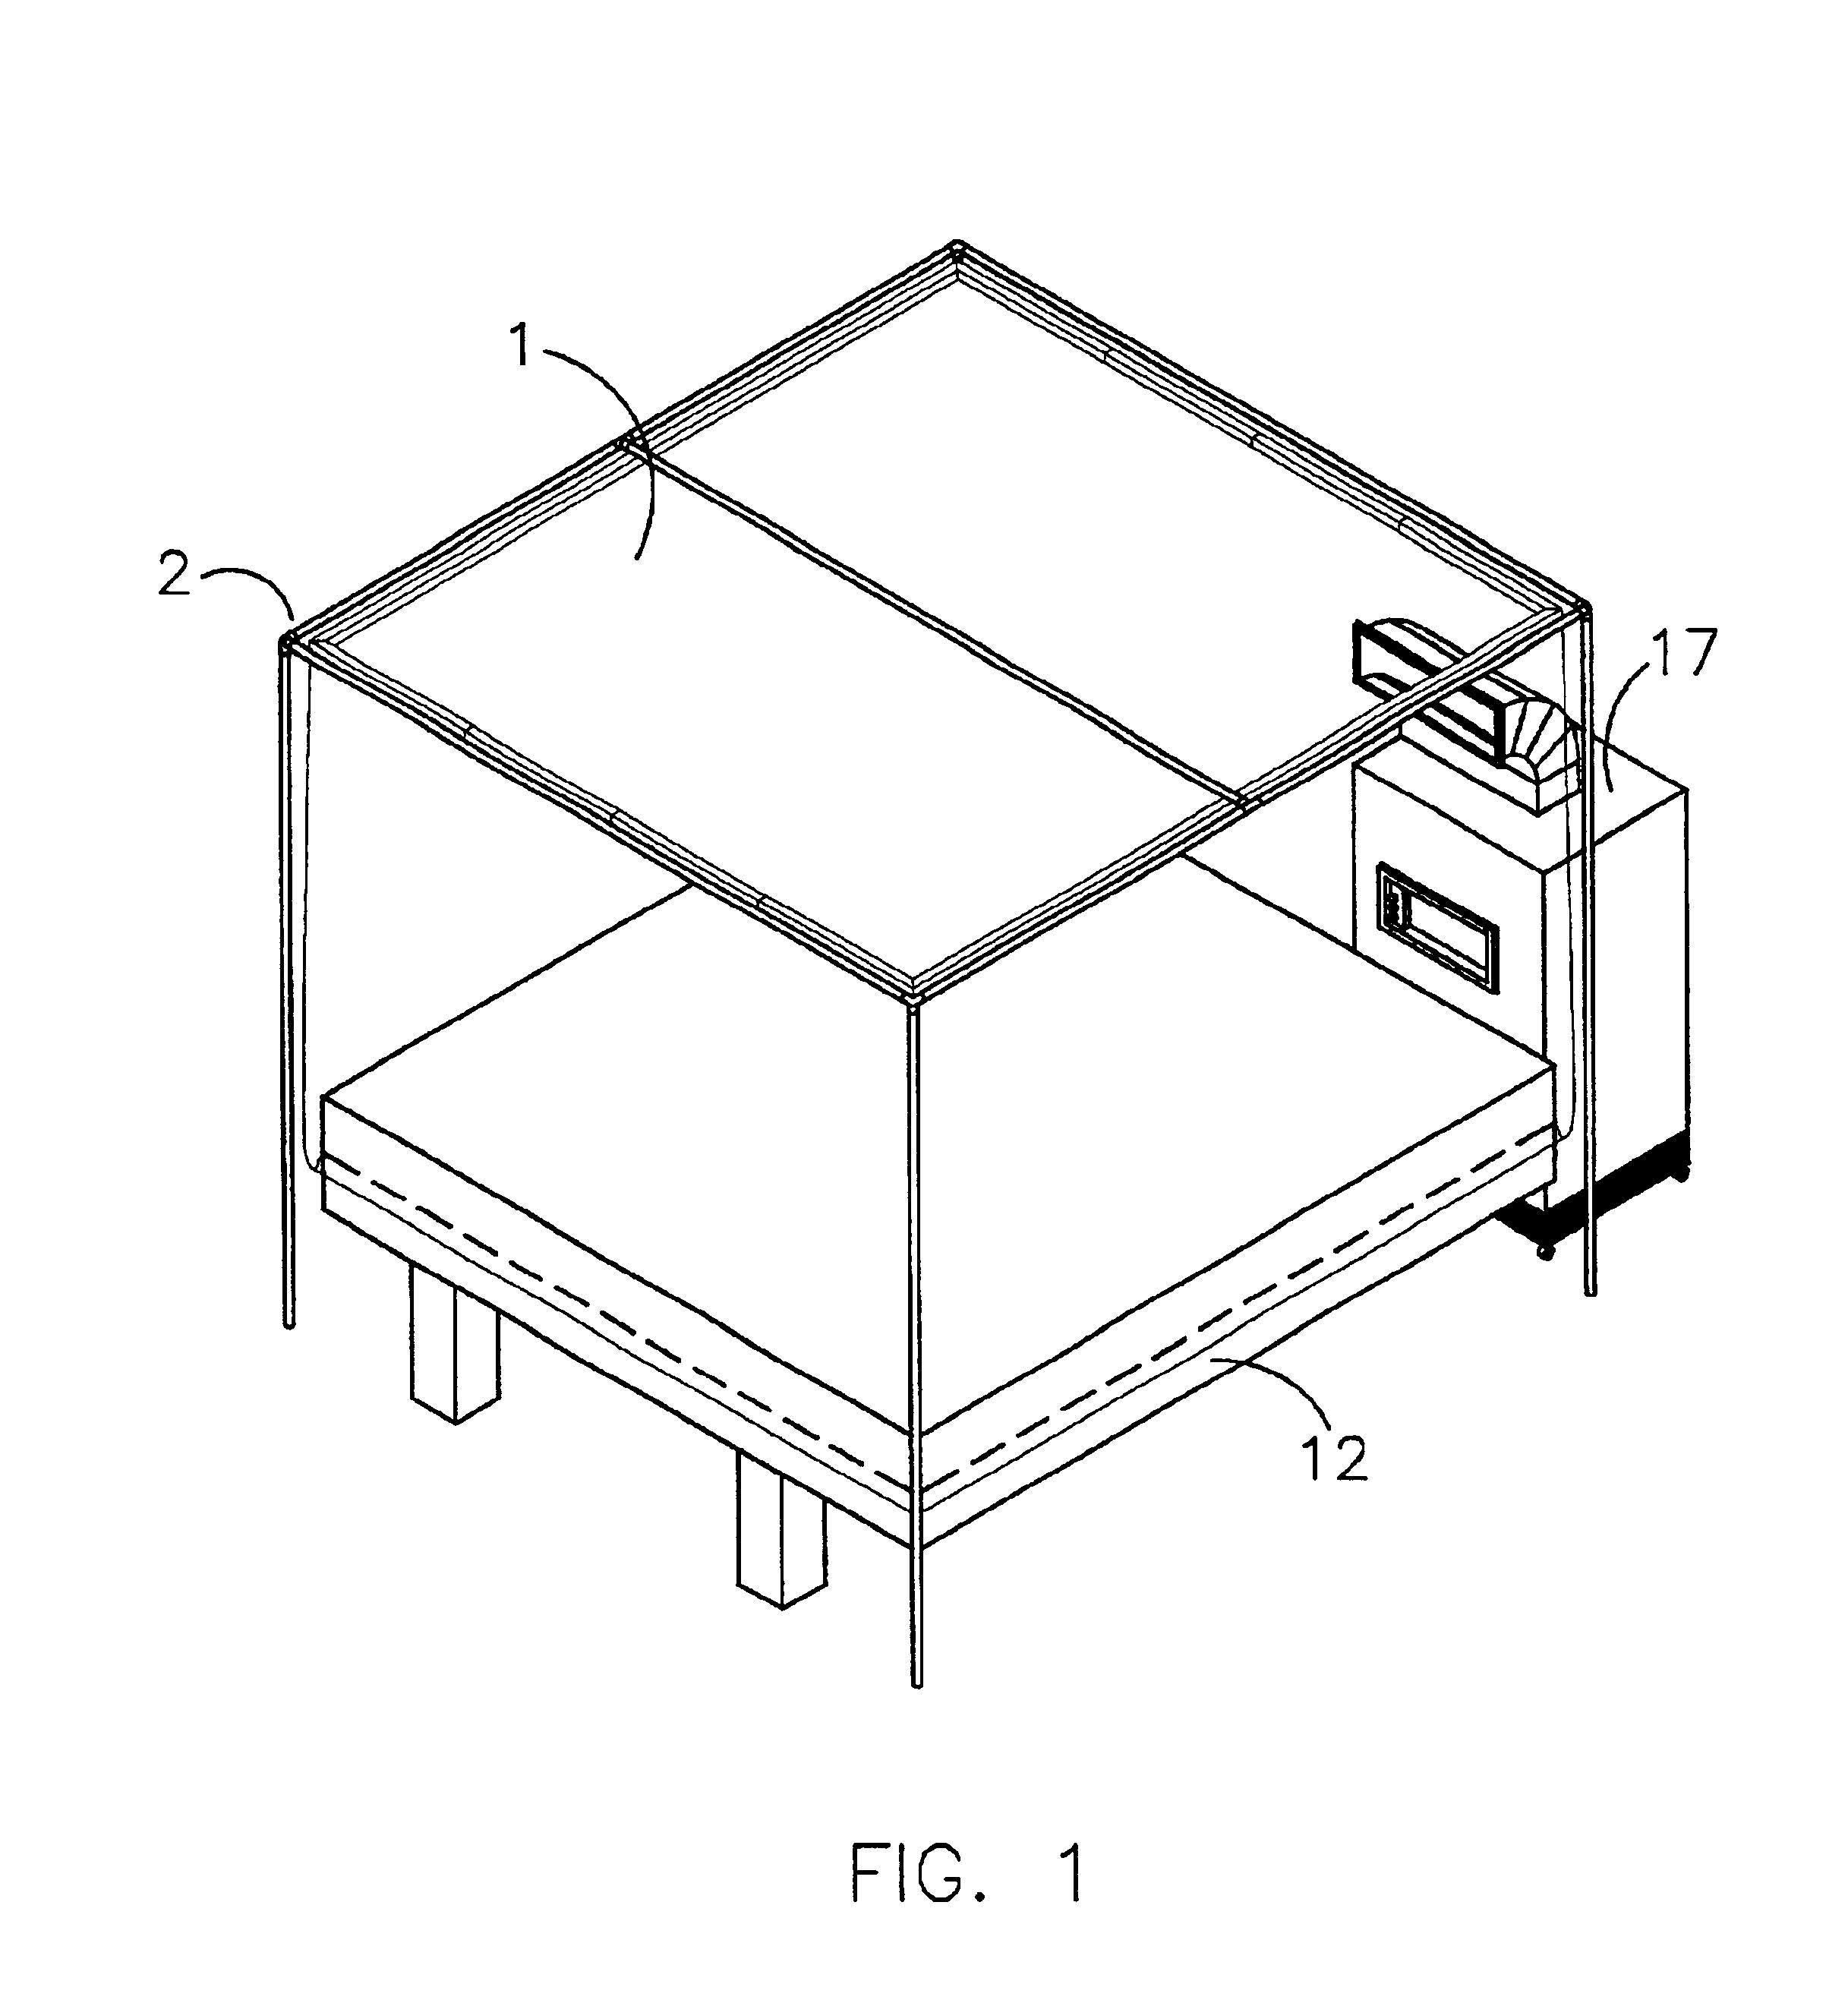 Self-contained air-conditioned enclosure